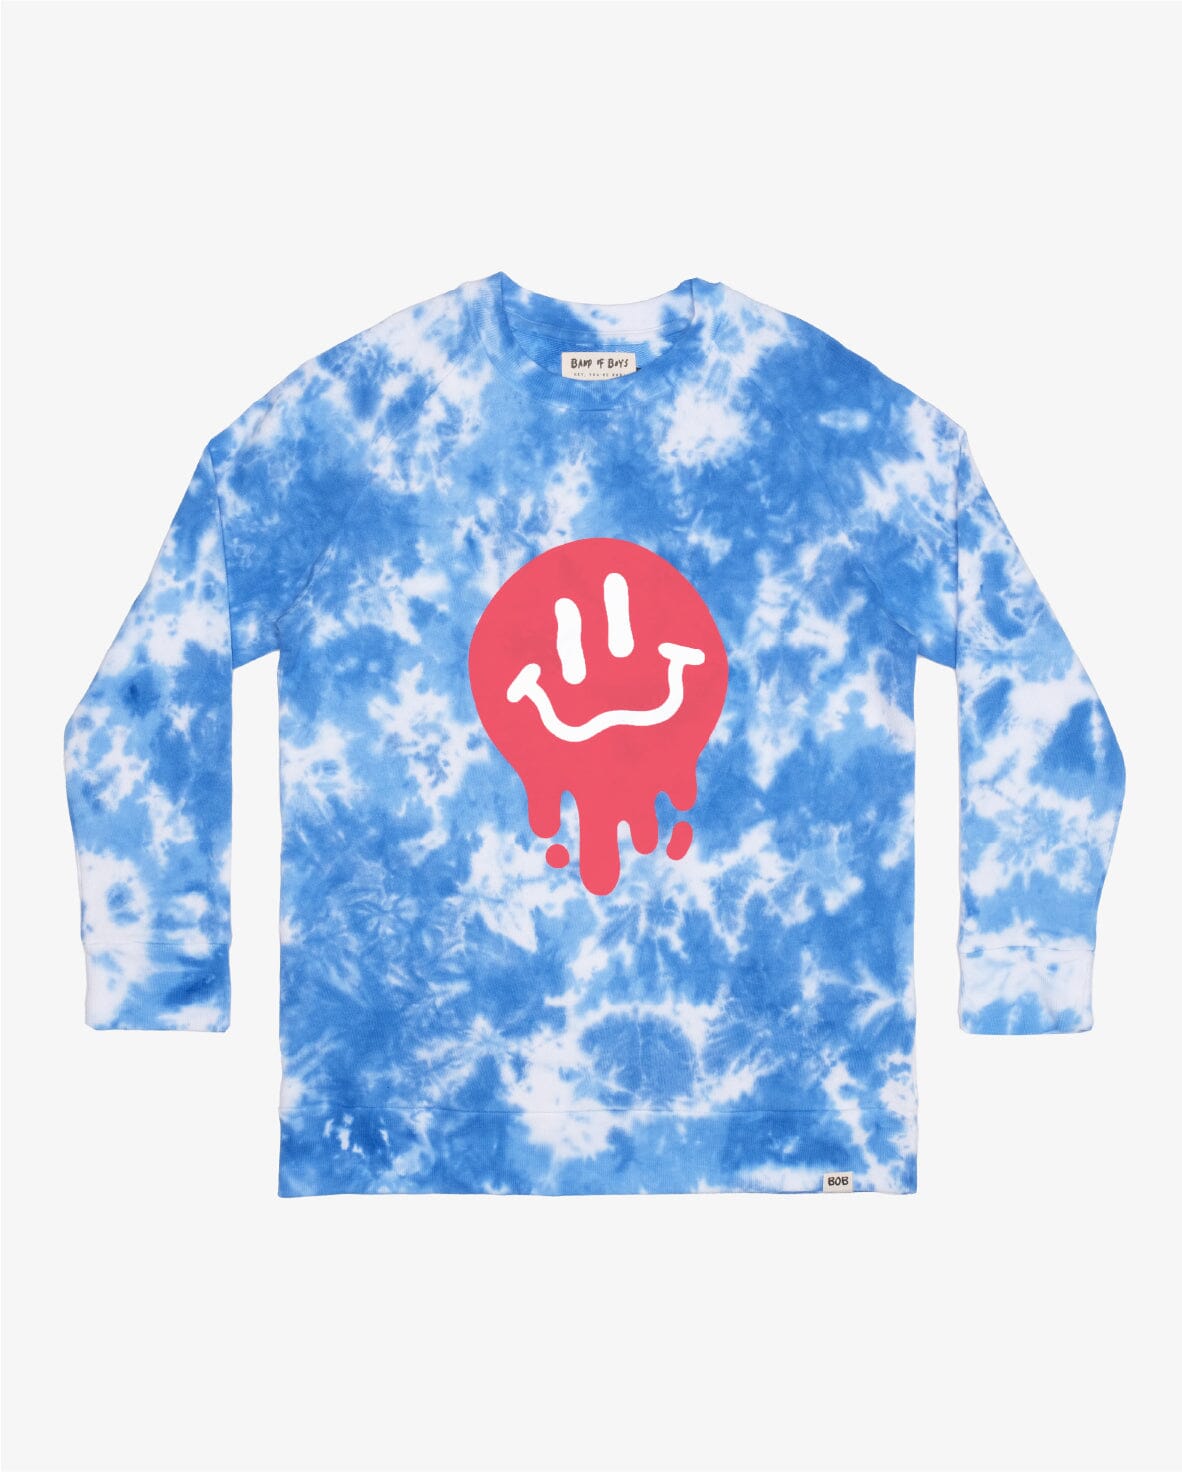 BAND OF BOYS | Drippin In Smiles Crew - Blue Tie Dye Boys Band of Boys